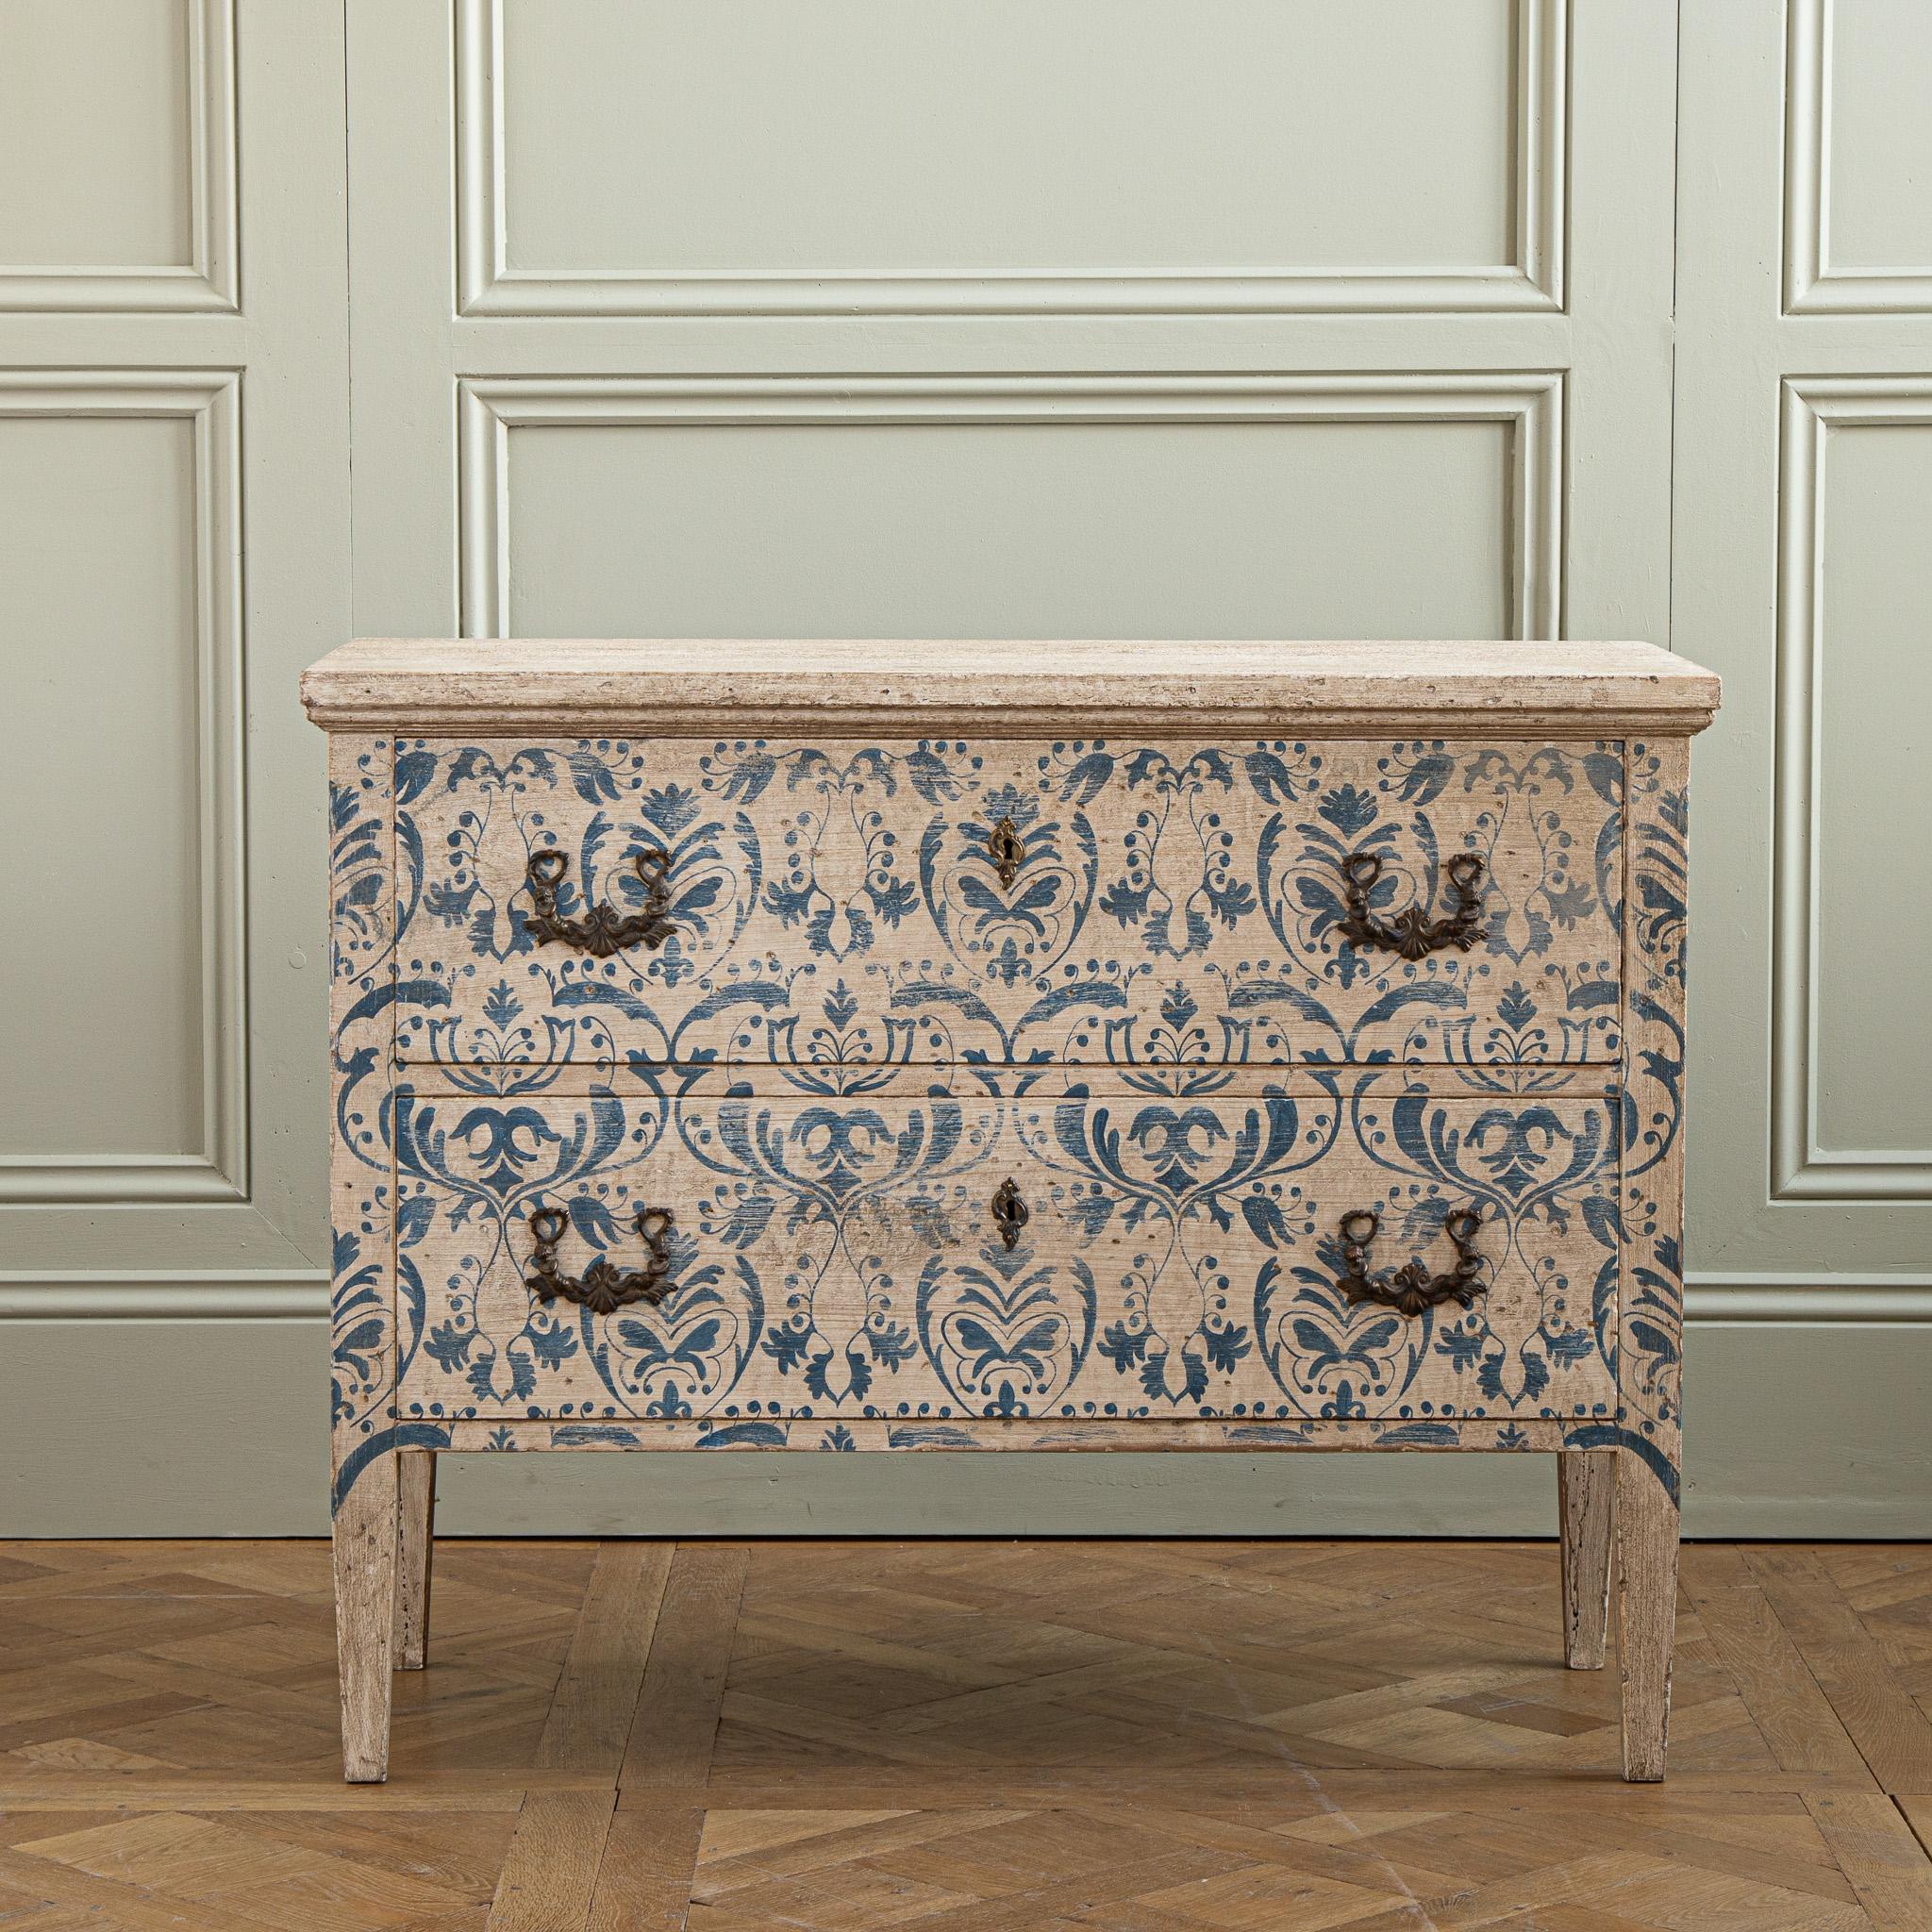 Hand-Painted Blue & White Florentine Style Hand Painted Italian Chest Of Drawers/Commode For Sale